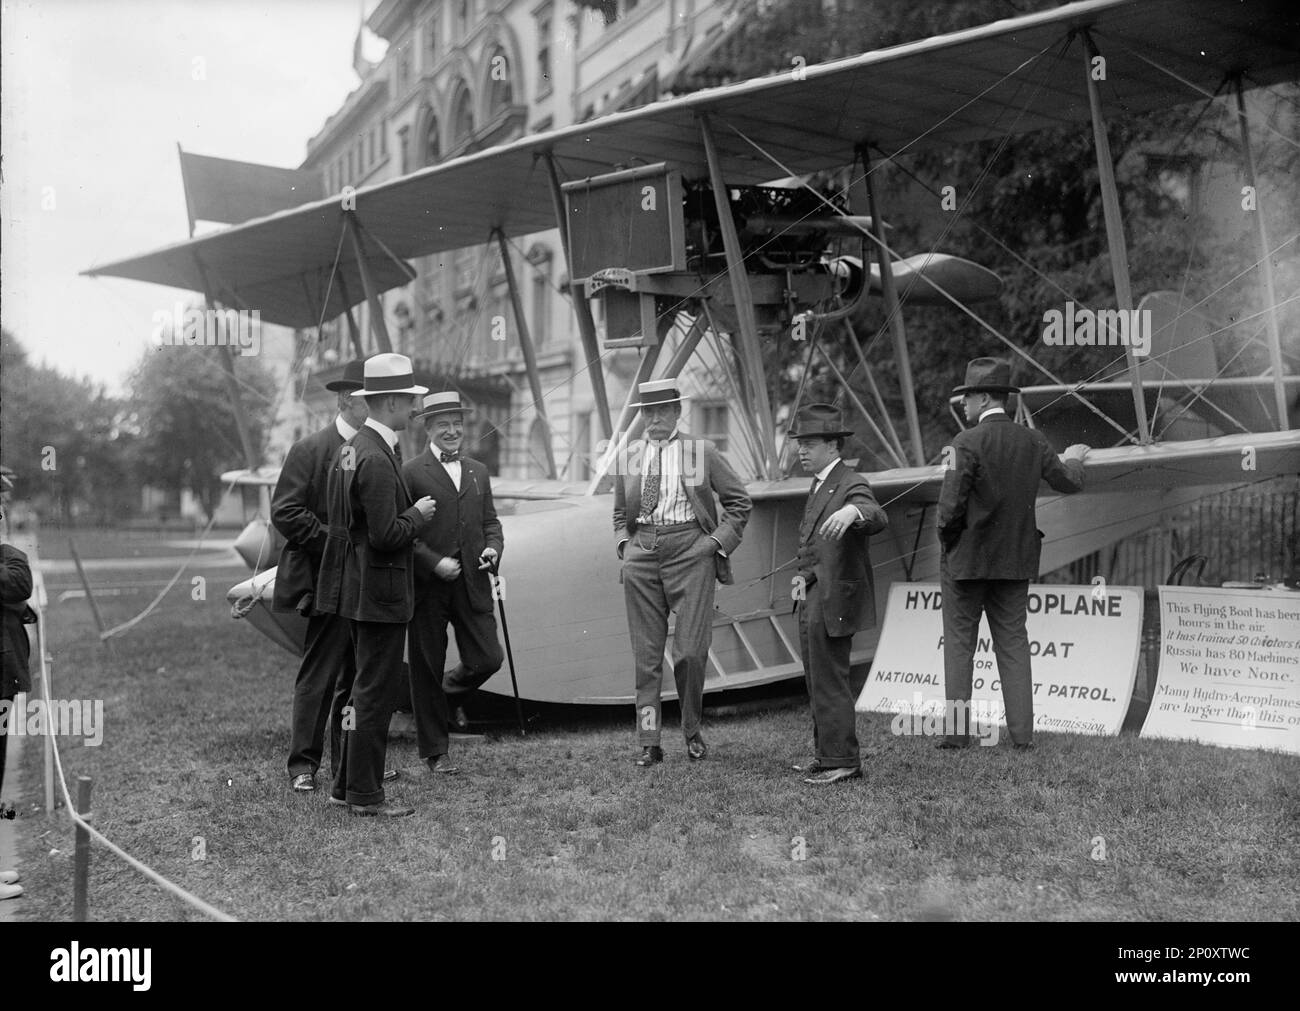 National Aero Coast Patrol Commn. - Curtiss Hydroaeroplane or Flying Boat Exhibited Near House Office Building, Bowman; Frankenfield; [Robert] Peary [centre]; Smith; Fred Kelly, 1917. Stock Photo